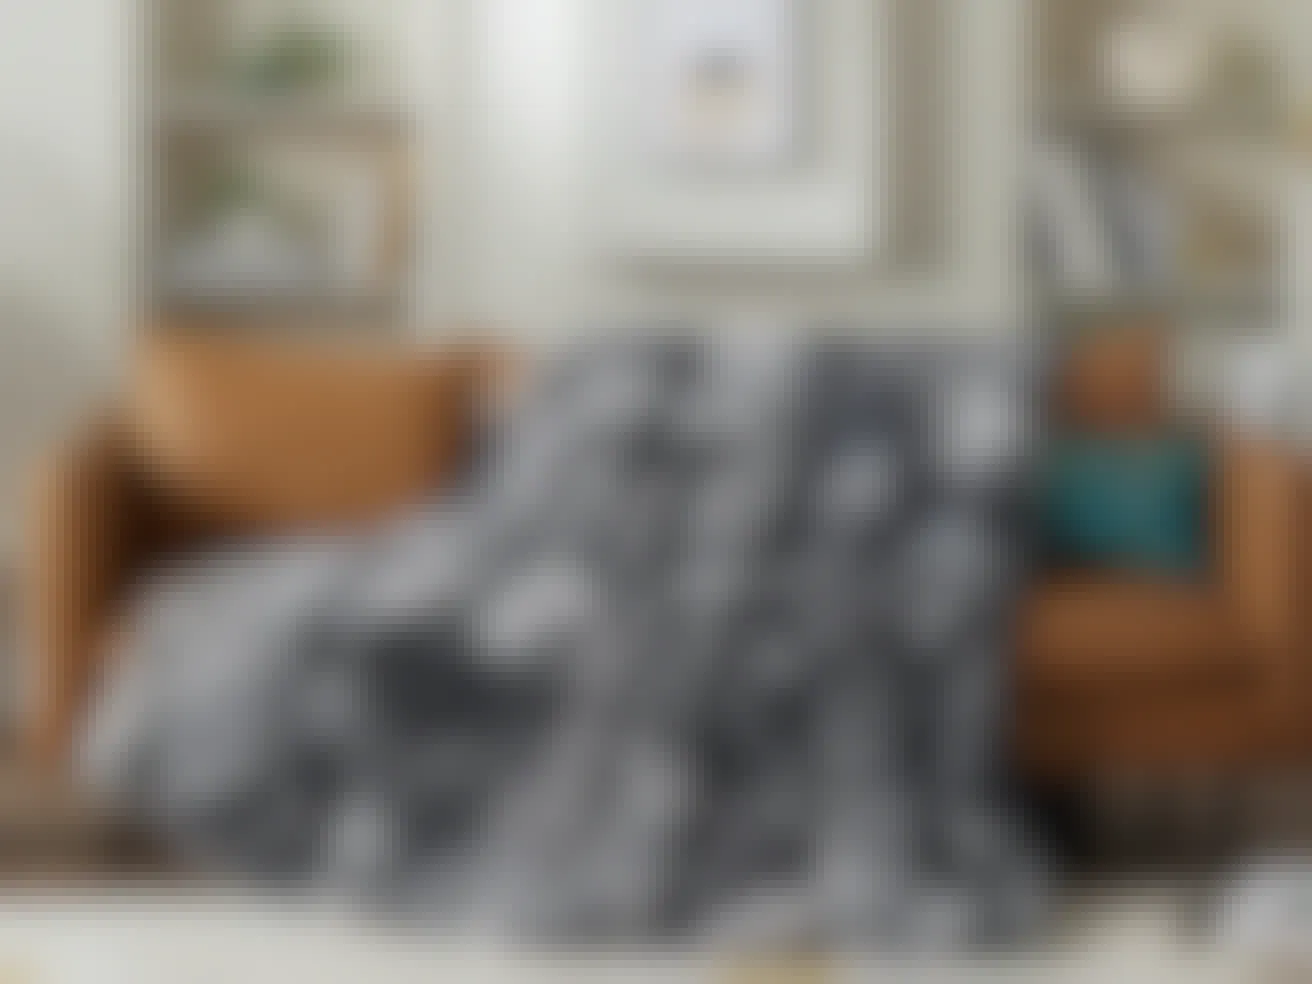 amazon gifts under $25 - A Faux Fur Throw Blanket draped over a sofa in a living room